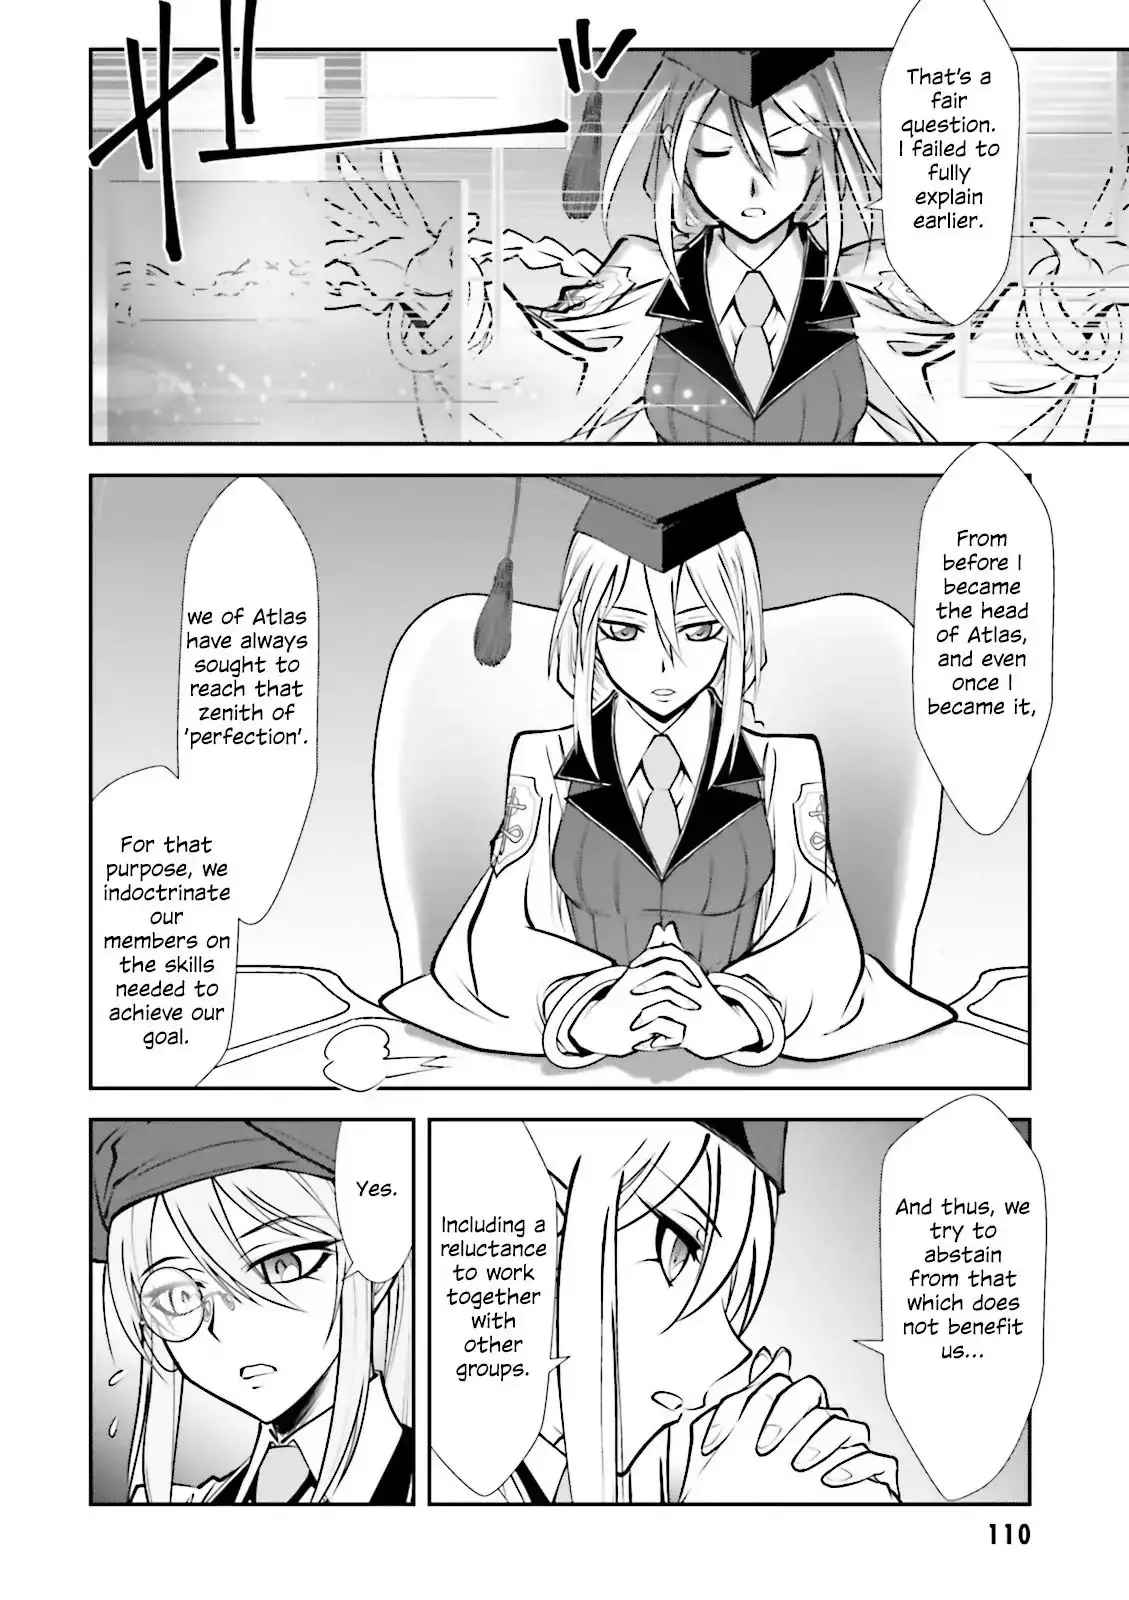 Melty Blood - Back Alley Alliance Nightmare - 3 page 20